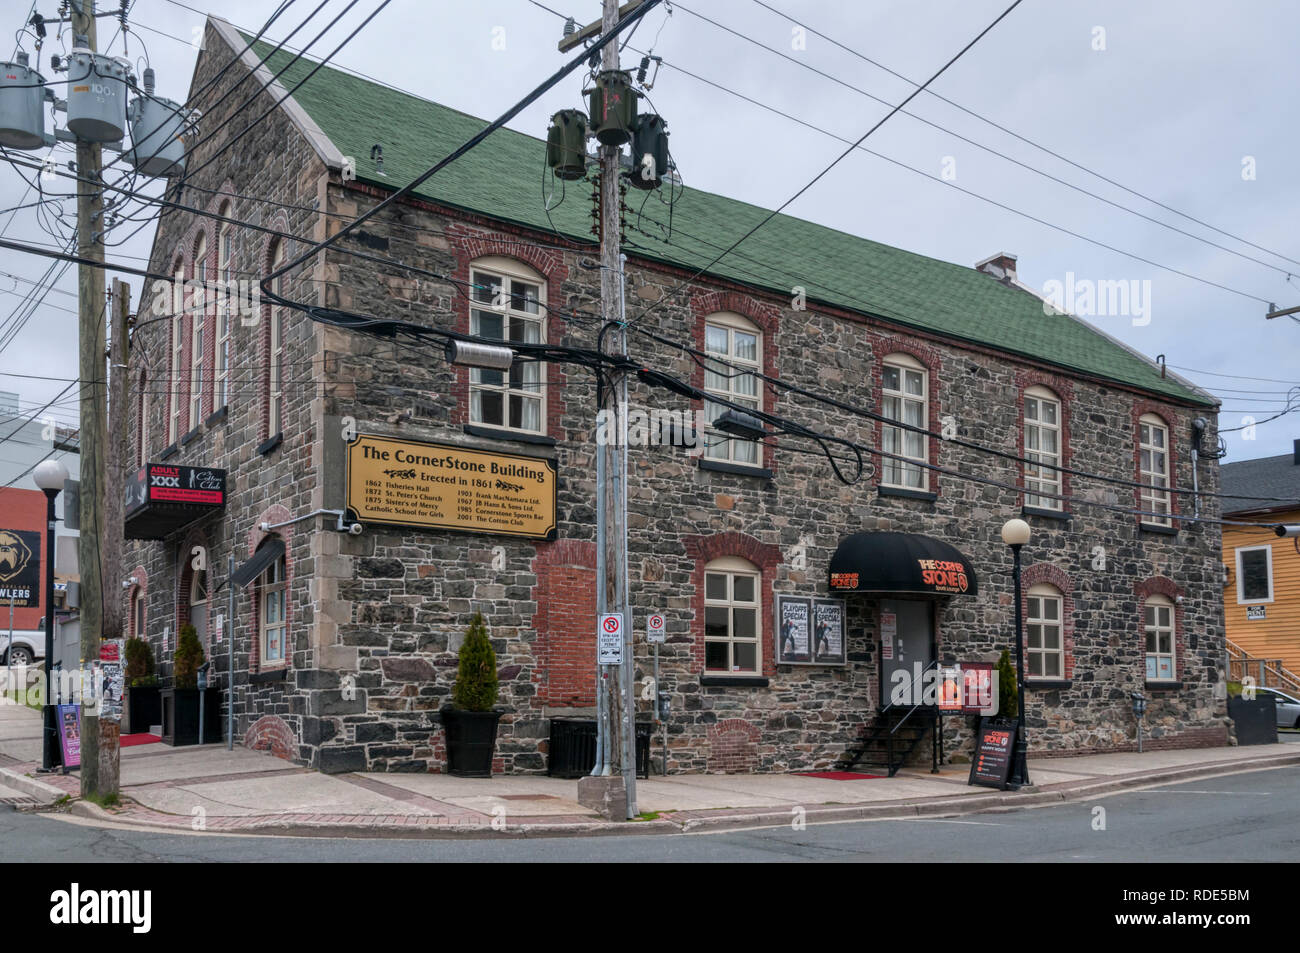 The historic Corner Stone Building in St John's, Newfoundland, built in 1861.  Now a strip club and sports bar. Stock Photo